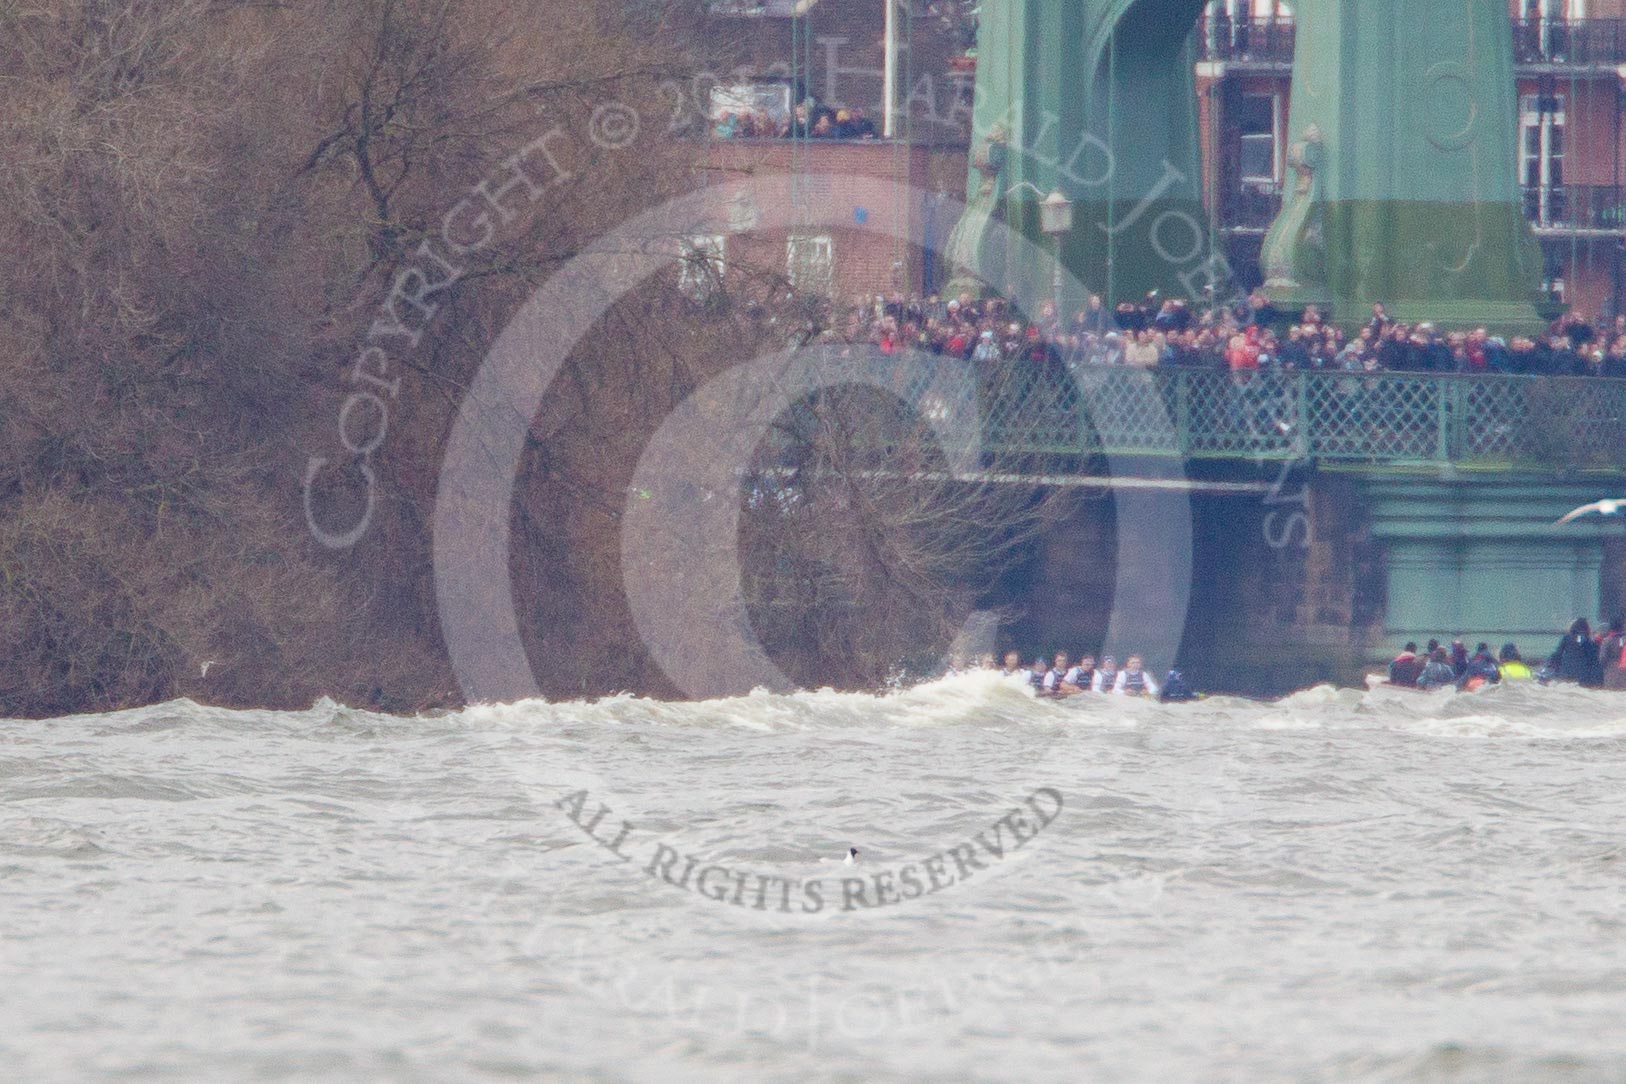 The Boat Race 2013.
Putney,
London SW15,

United Kingdom,
on 31 March 2013 at 16:37, image #351